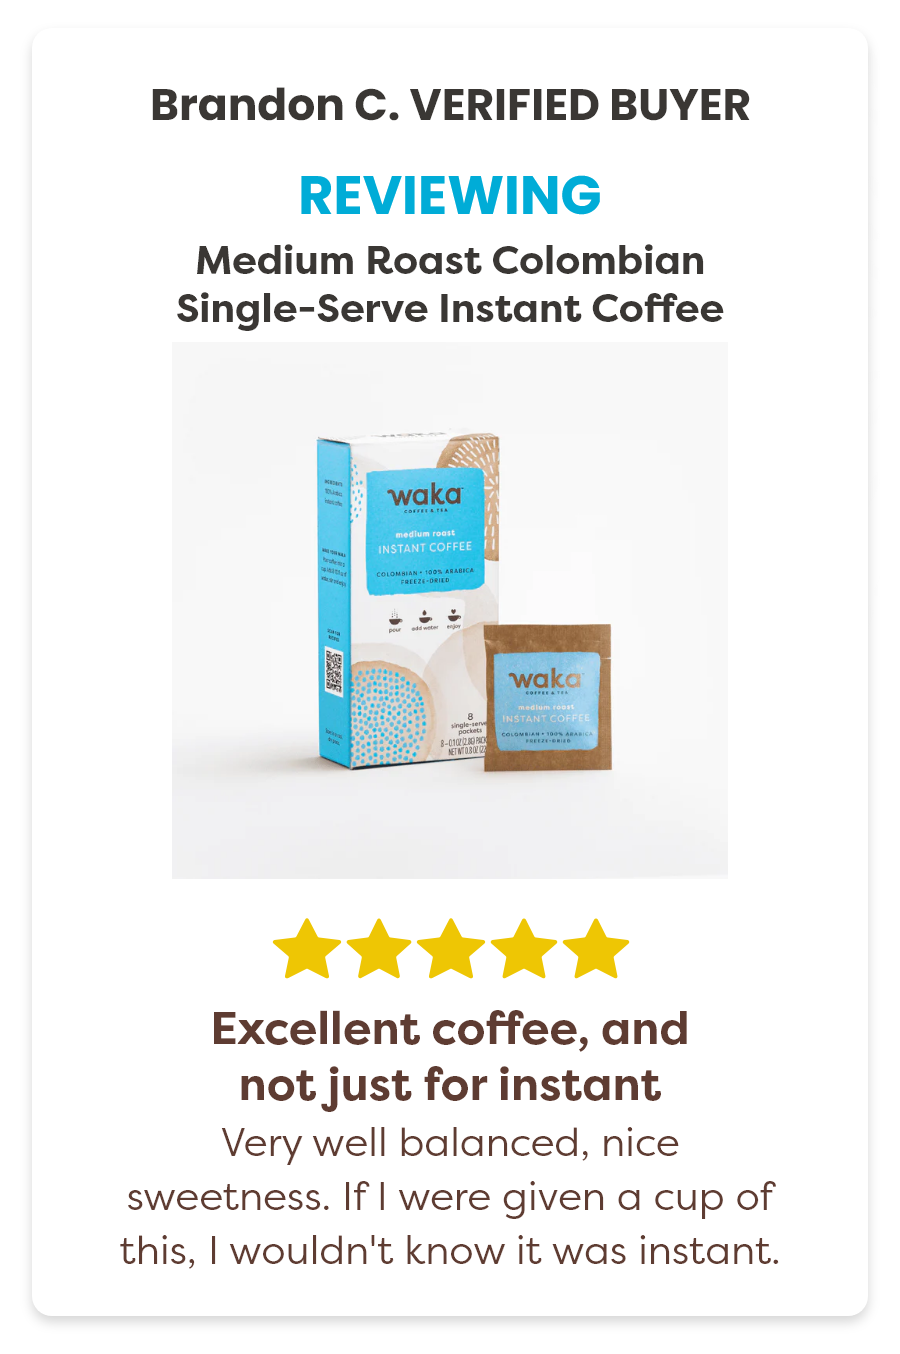 Brandon C. Verified Buyer Reviewing the Medium Roast Colombian Single-Serve Instant Coffee 5 stars. Excellent coffee, and not just for instant Very well balanced,nice sweetness. If I were given a cup of this, I wouldn't know it was instant.